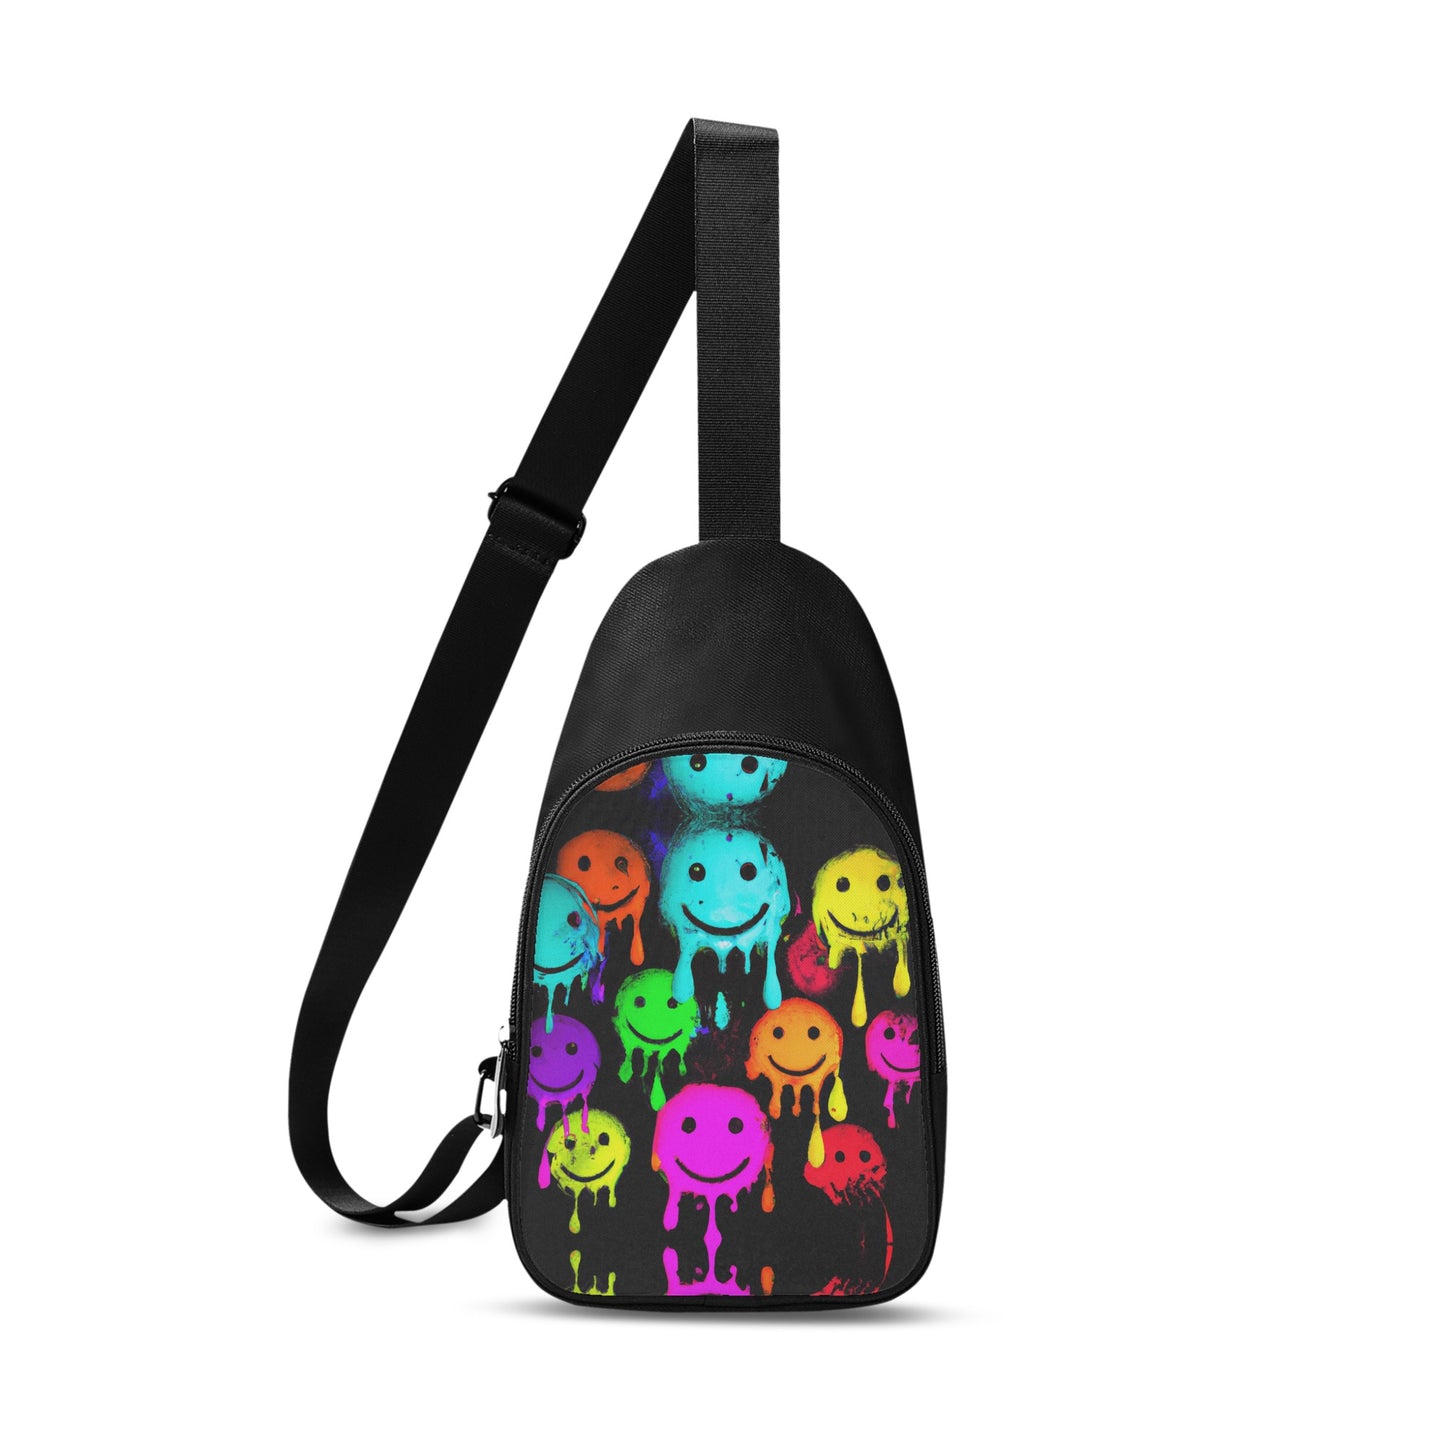 This unisex chest bag has a bright digitally printed design on the front.  The visual features a vibrant design of spray-painted smiley faces.  This cross-body bag is truly a statement piece.